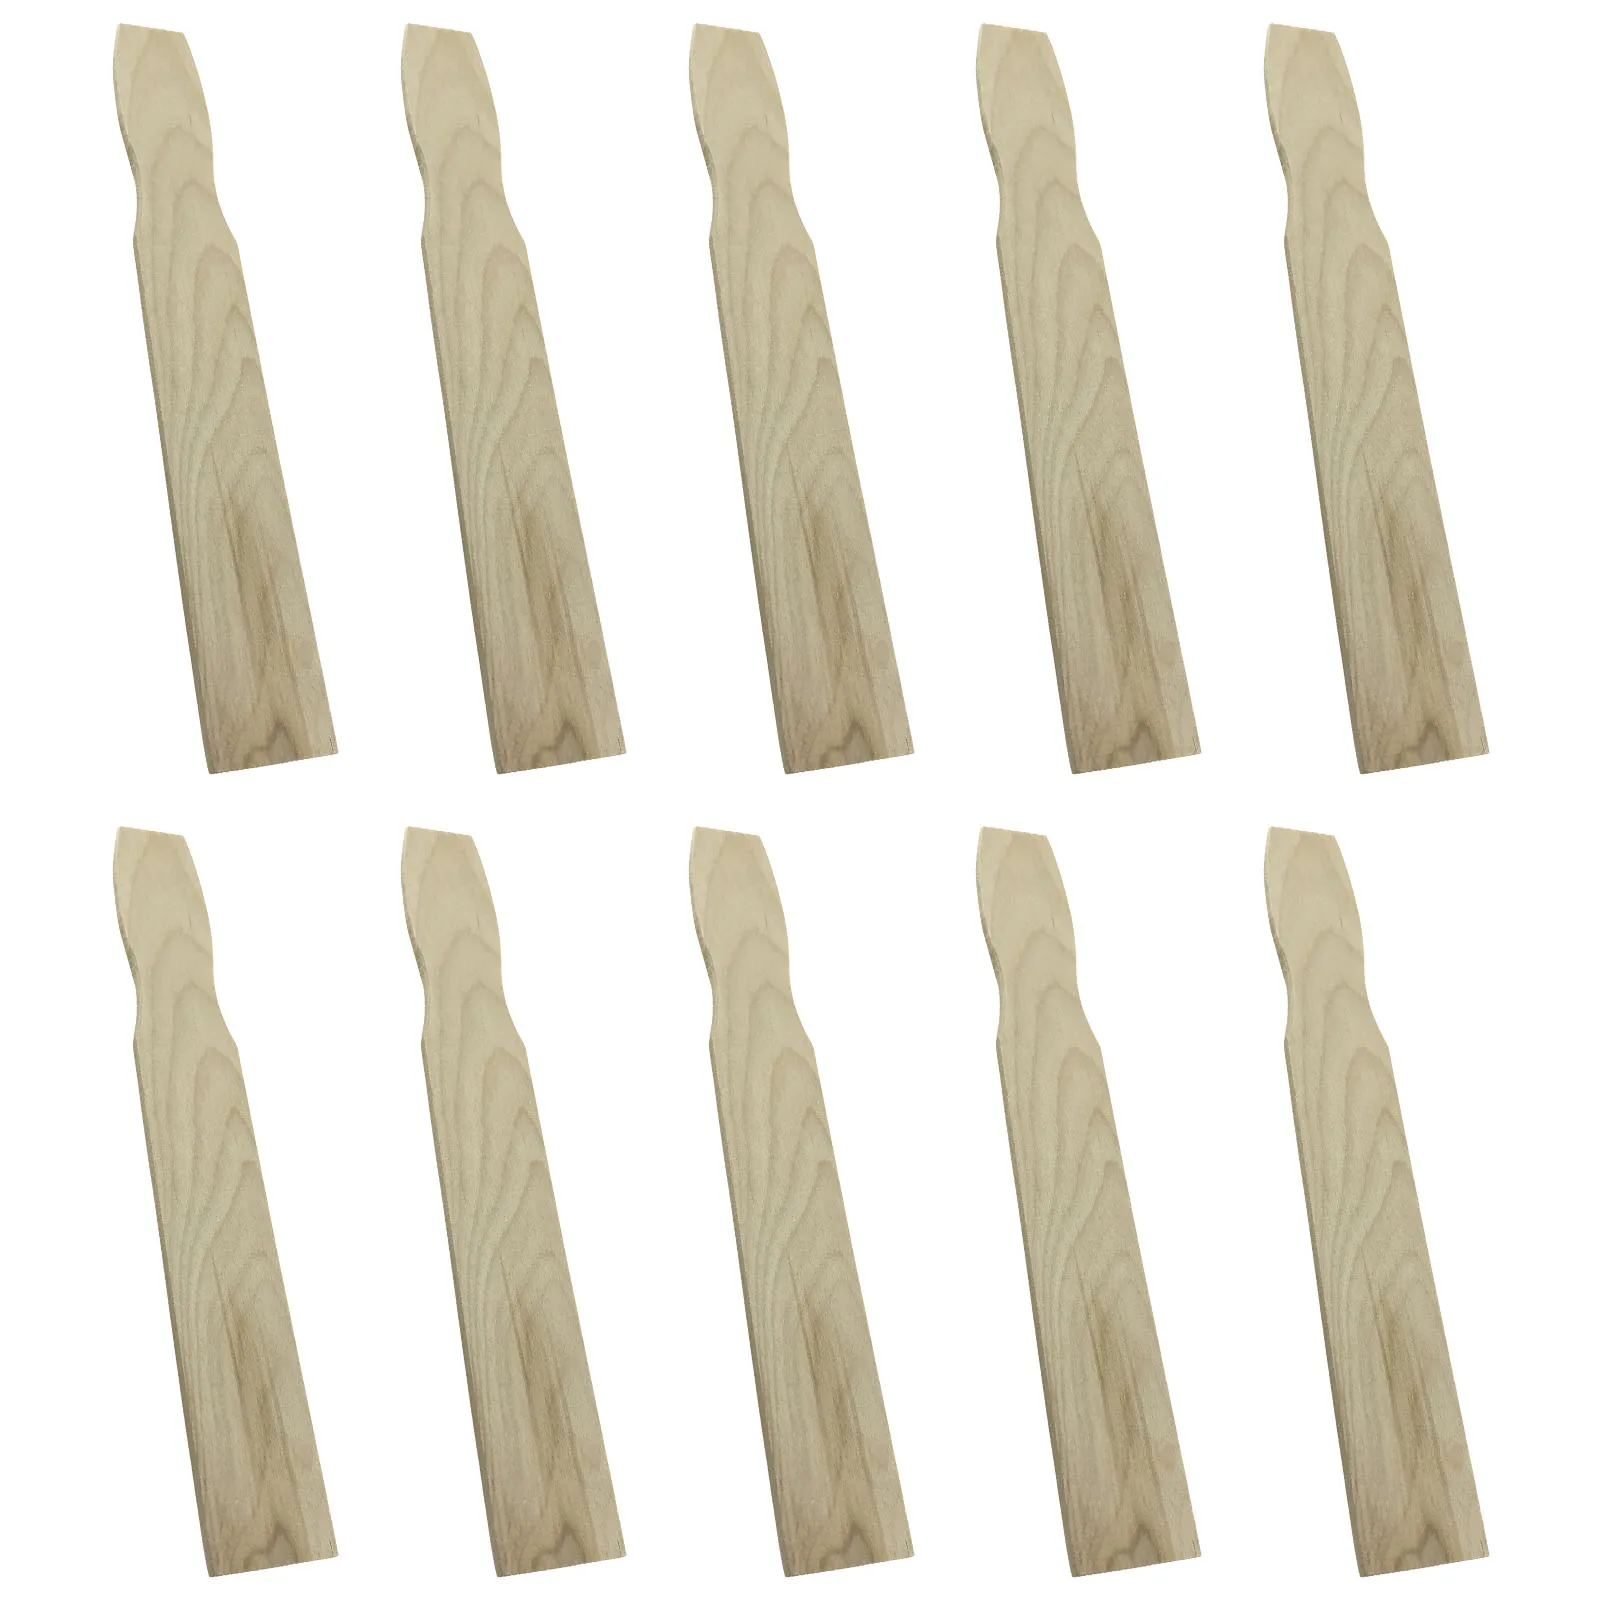 

10pcs Garden Practical Customers Project Resin Hardwood Stirrers Durable Epoxy Paint Sticks Measuring Scale Sturdy For Mixing